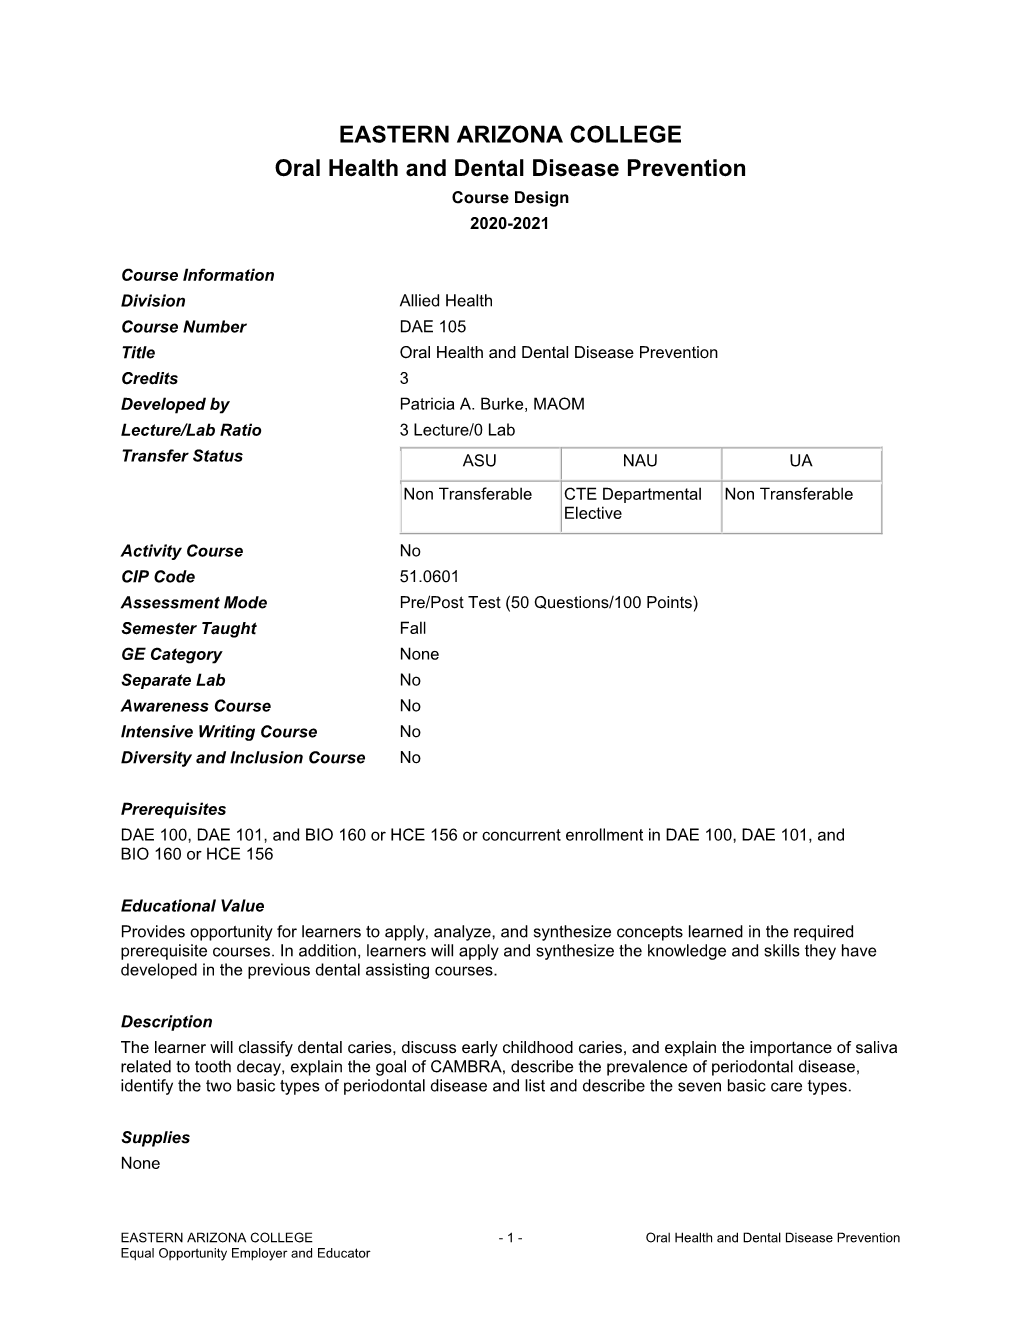 DAE 105 Title Oral Health and Dental Disease Prevention Credits 3 Developed by Patricia A